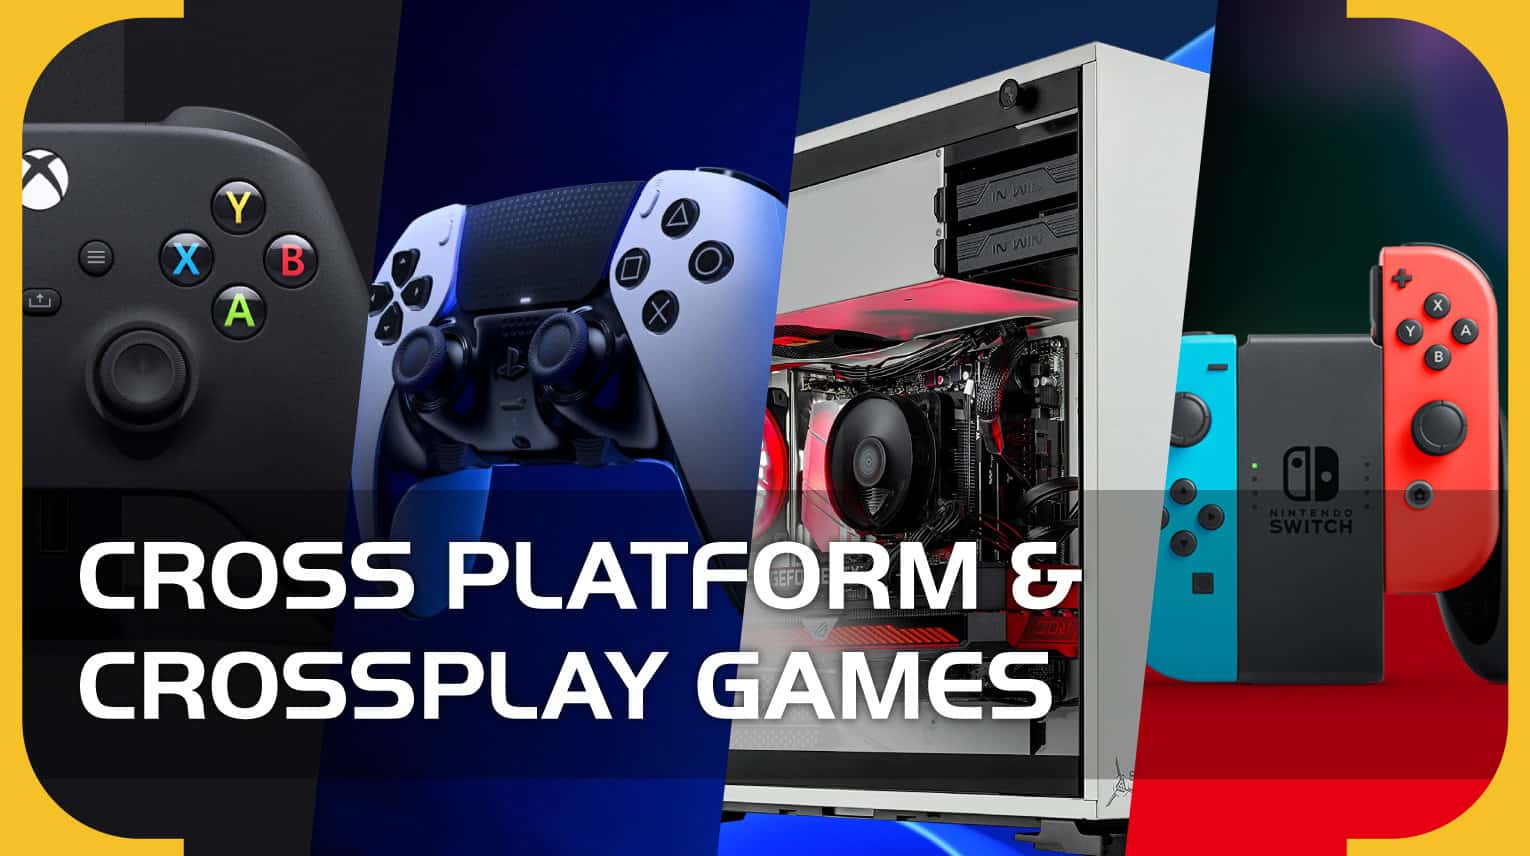 Every Cross Platform & Crossplay Game (October 2022) - PS5, Xbox Series X,  PC, PS4, Xbox One, Nintendo Switch) 